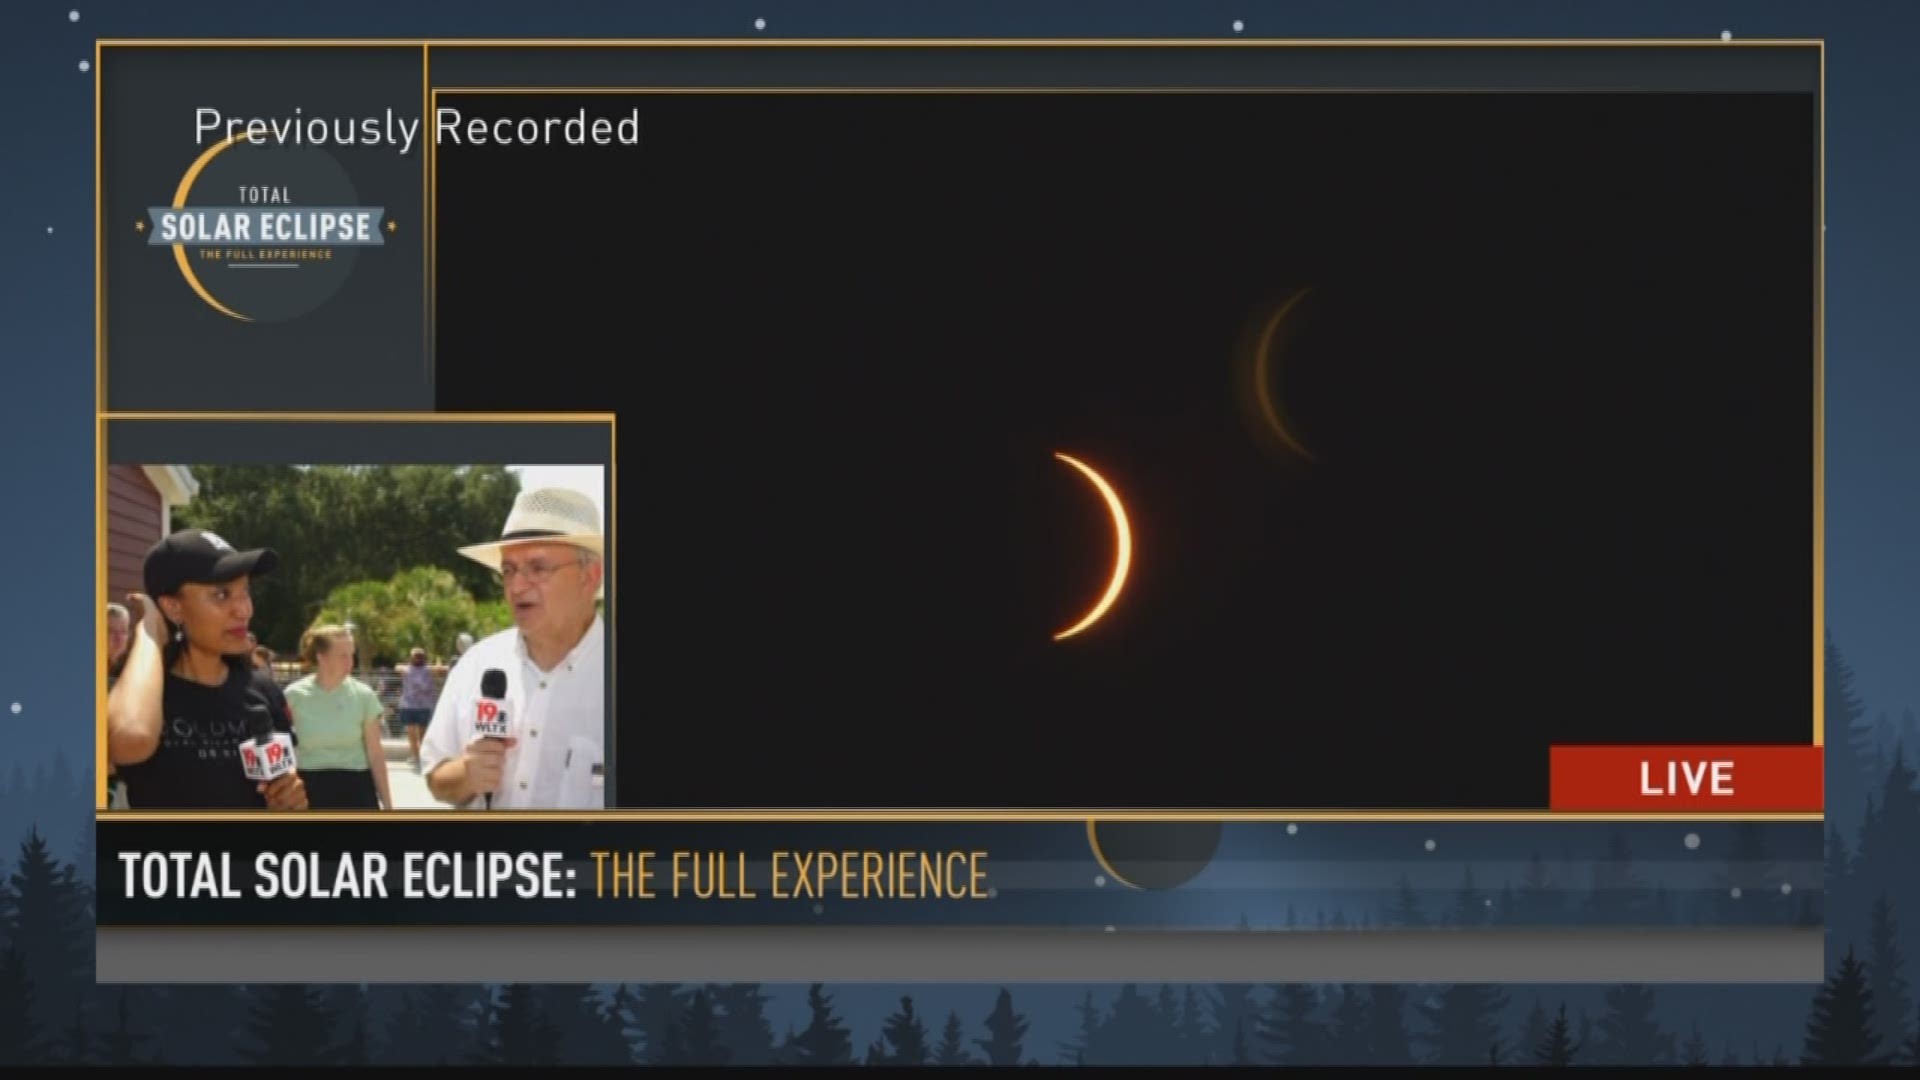 Jim Gandy has been waiting some 42 years to see a total solar eclipse. Watch his emotional reaction.